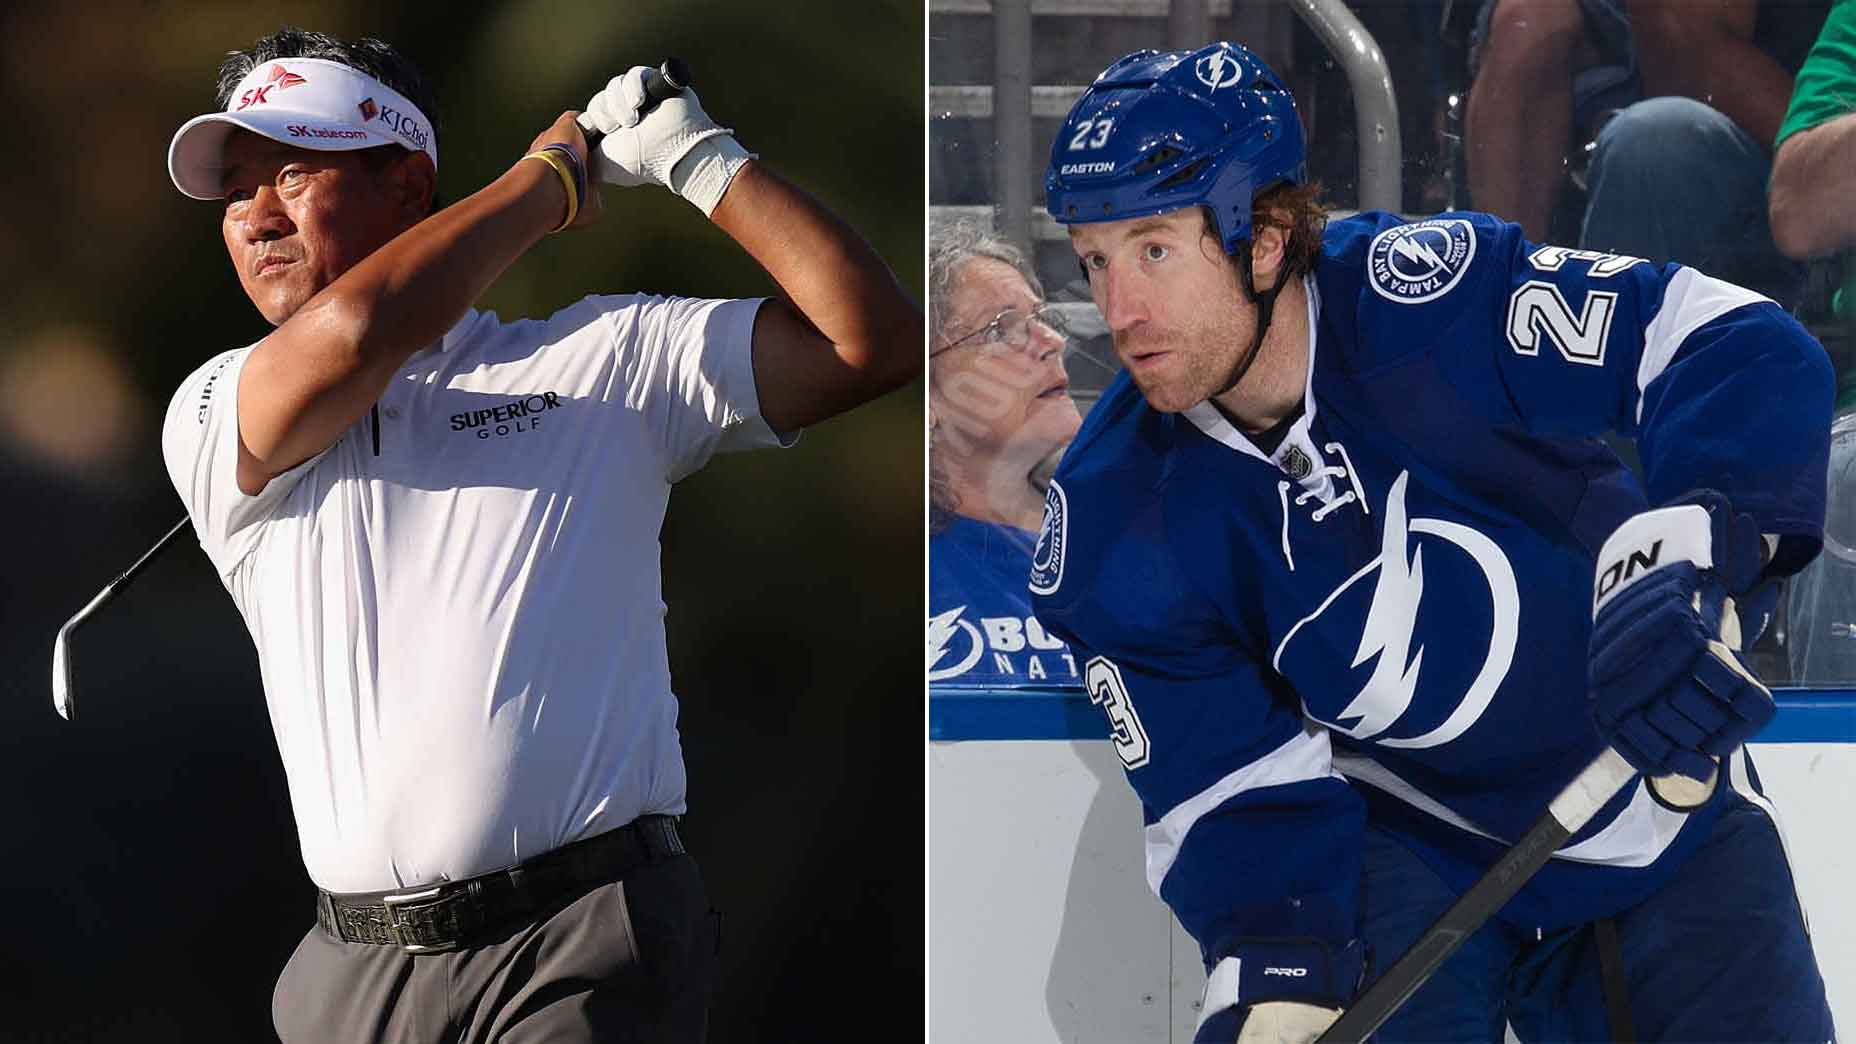 Pro golfer K.J. Choi, left, and NHL Stanley Cup Champion Mike Commodore, right.